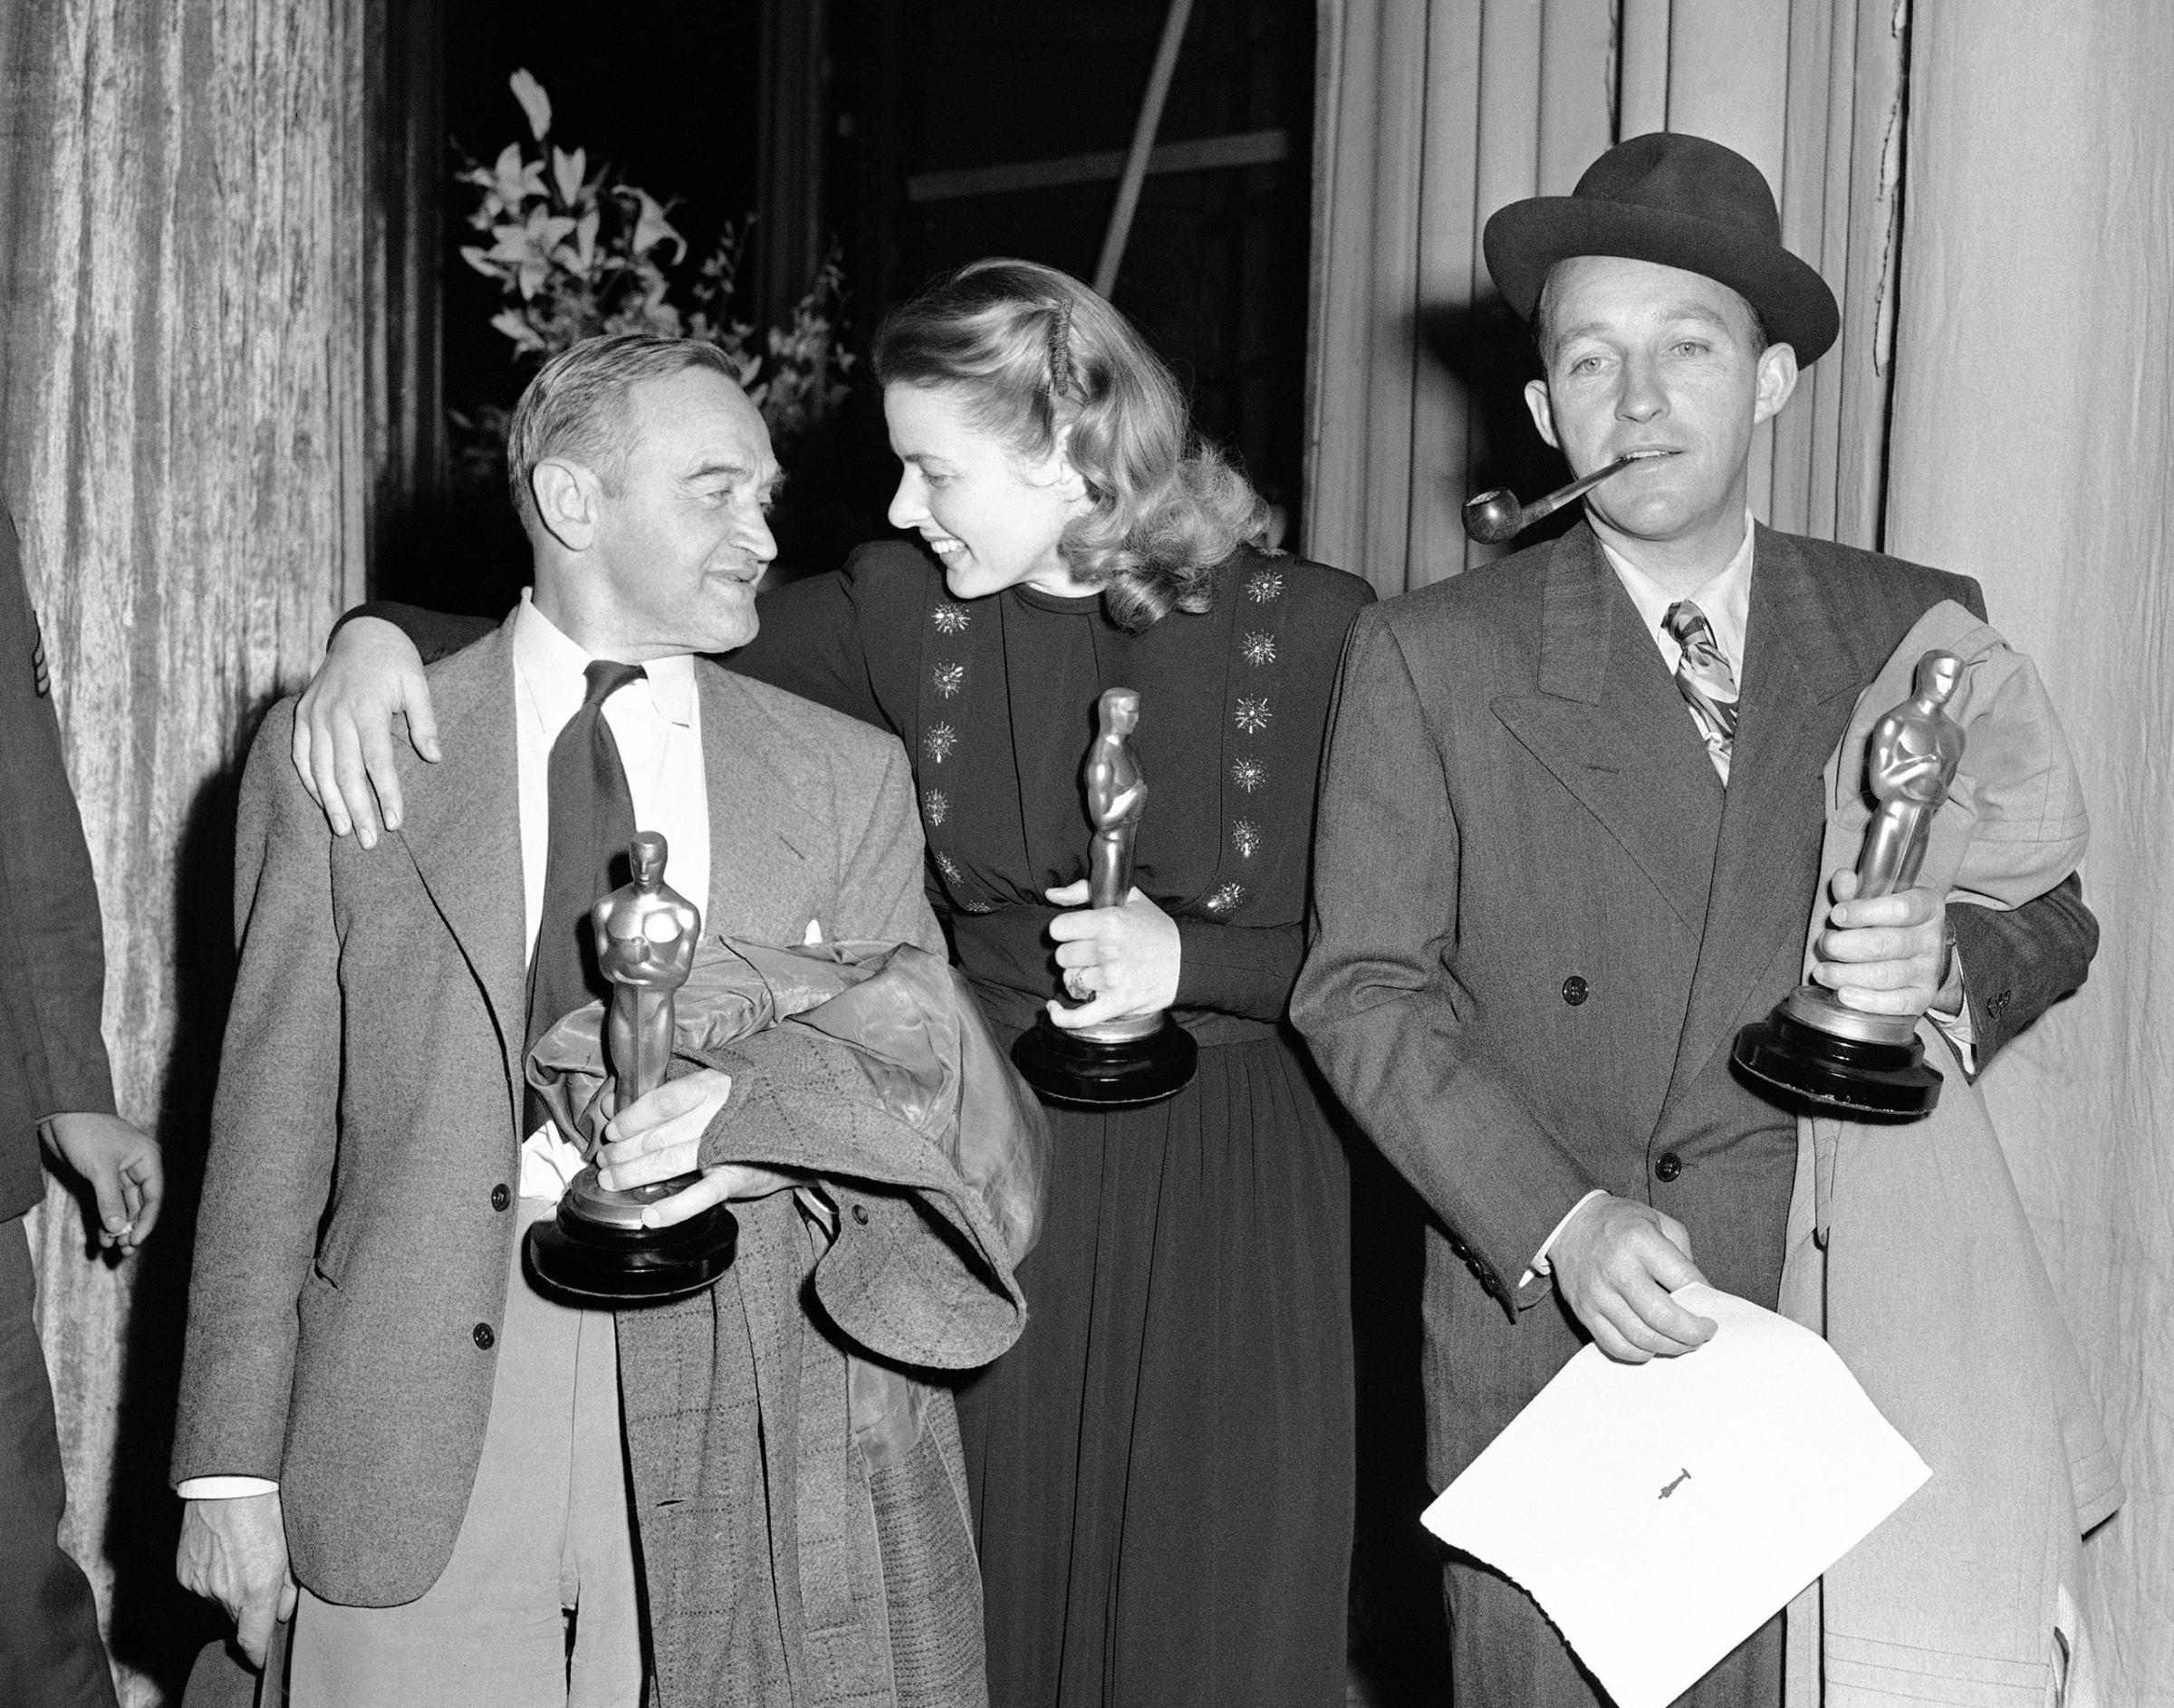 Barry Fitzgerald, Ingrid Bergman and Bing Crosby at the Academy Awards, 1945.